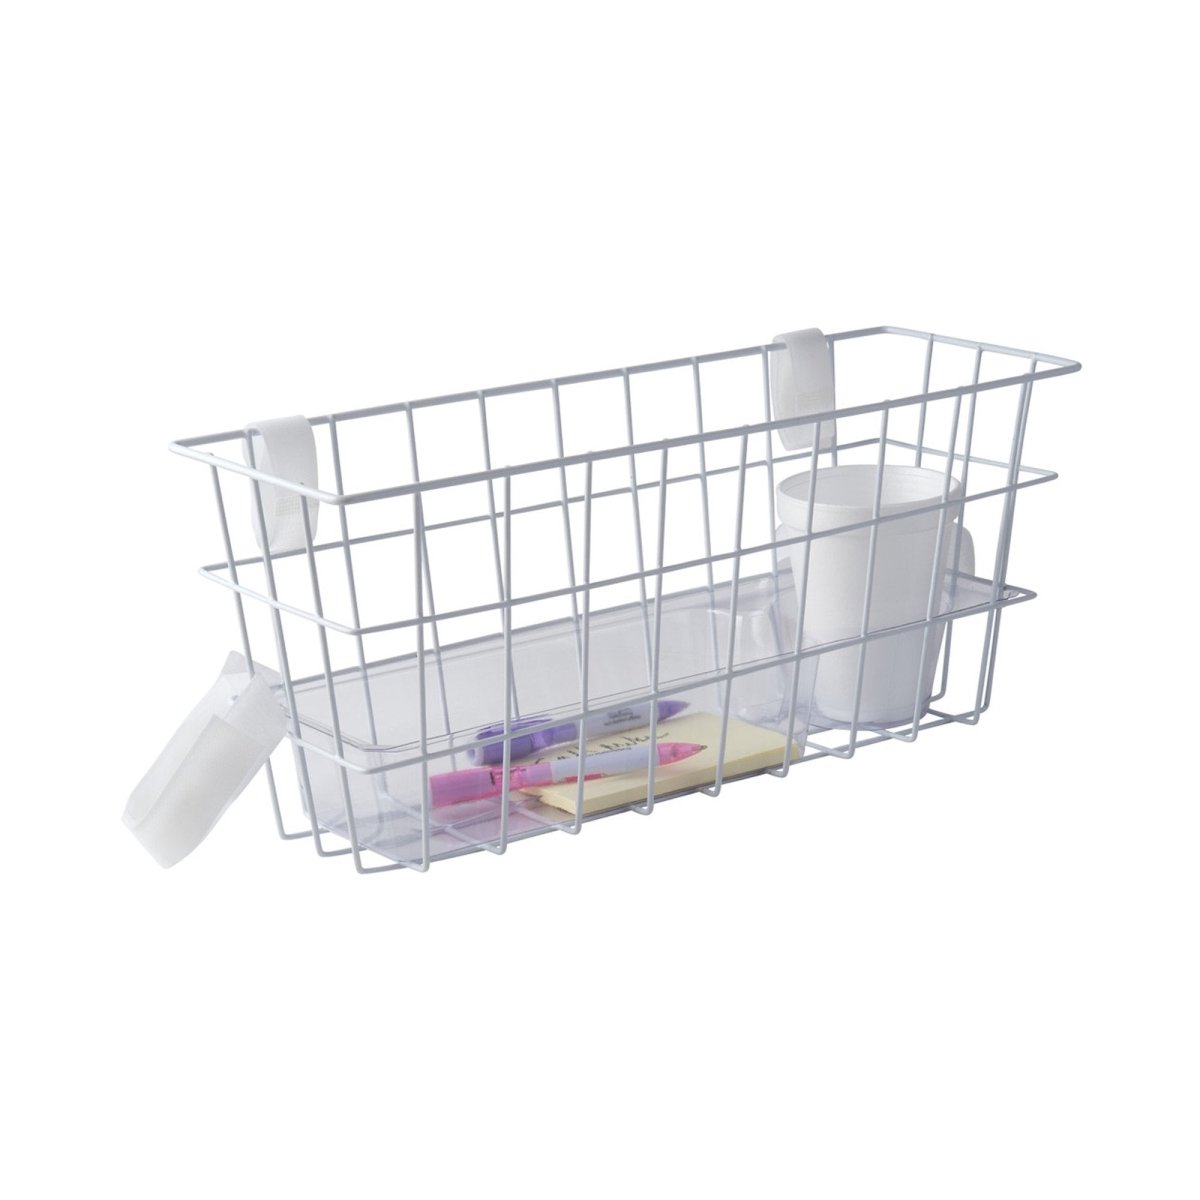 Mabis Walker Basket, For Use With Walkers, 16 in. L x 5.5 in. W x 7 in. H, Plastic - 1095354_EA - 1